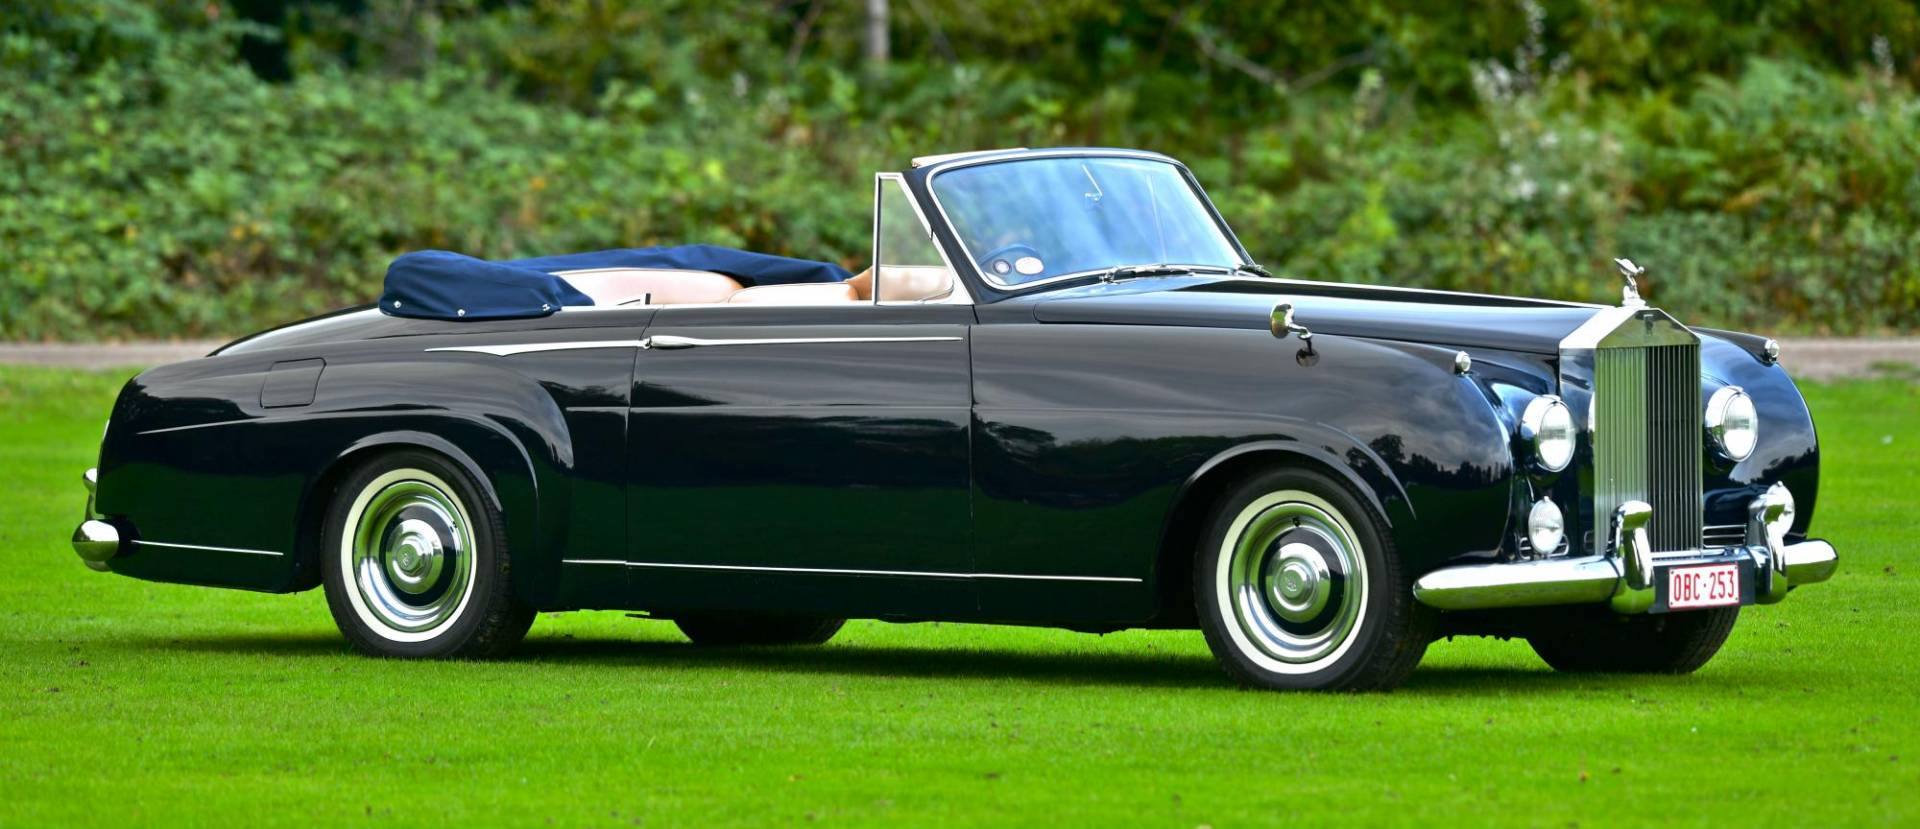 Rolls-Royce Silver Cloud Convertible Classic Cars for Sale - Classic Trader